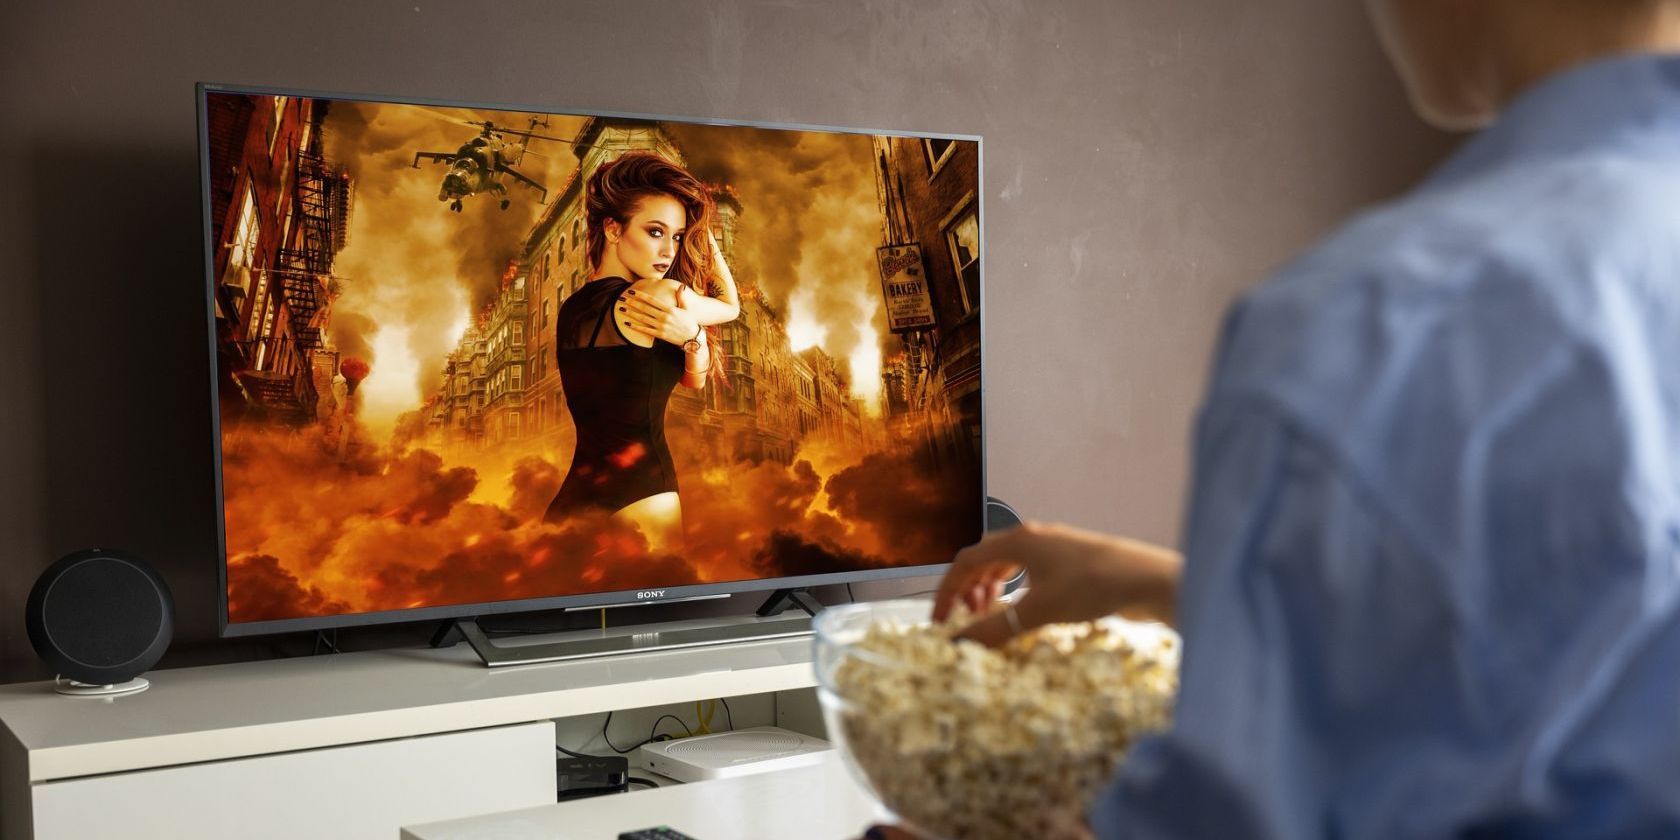 Woman watching action movie on TV while eating popcorn